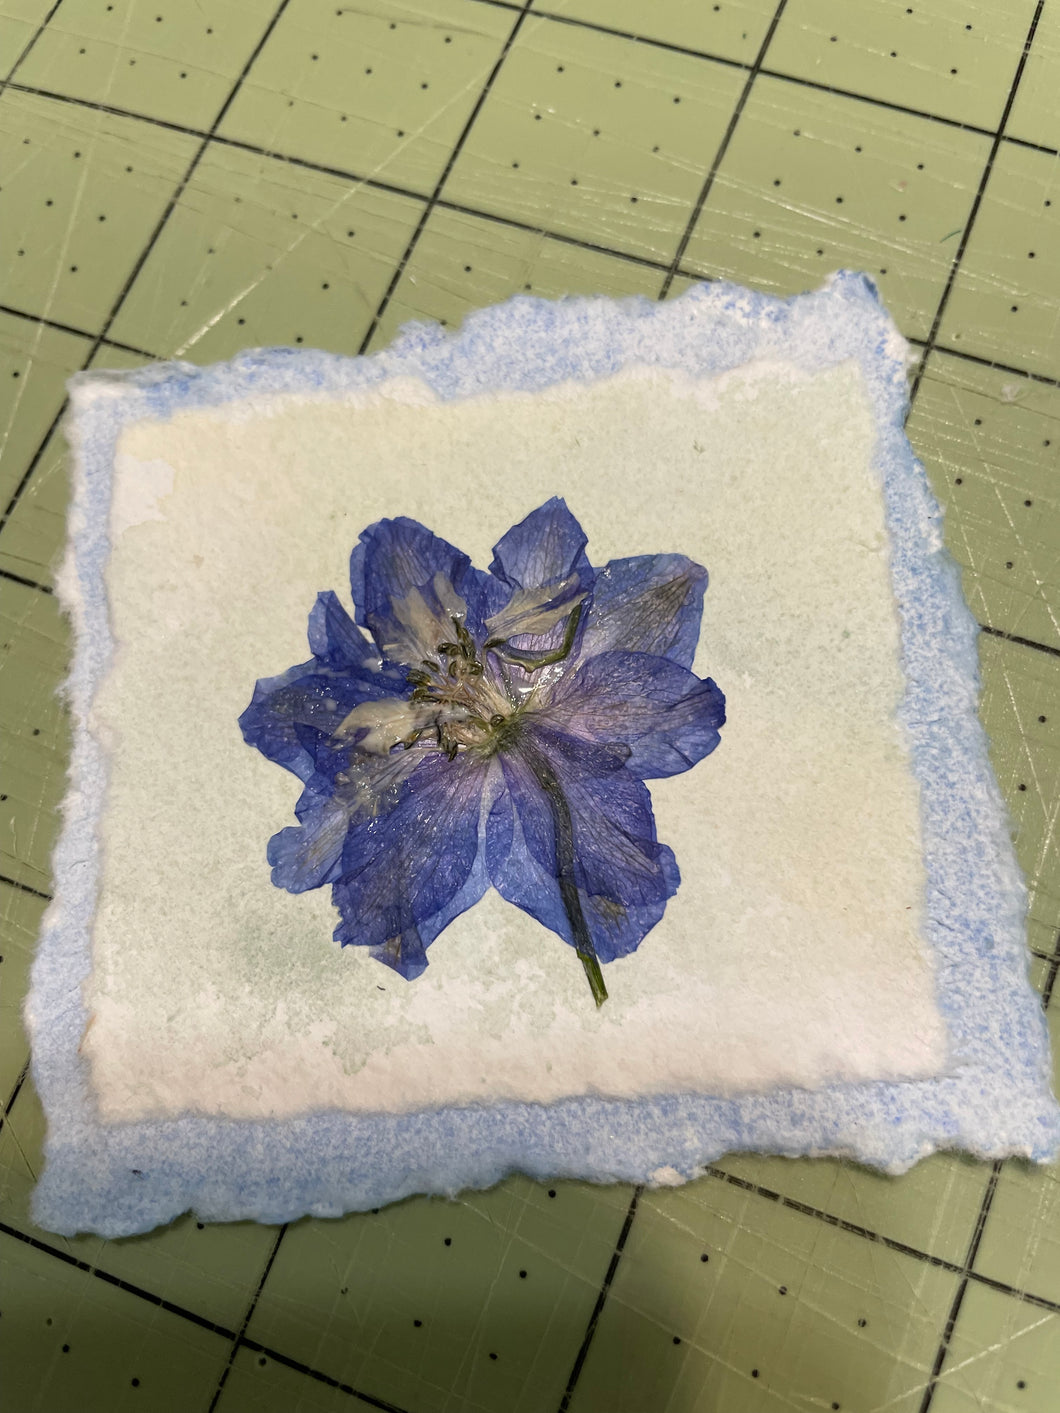 Free Download: Flower Pressing Tips